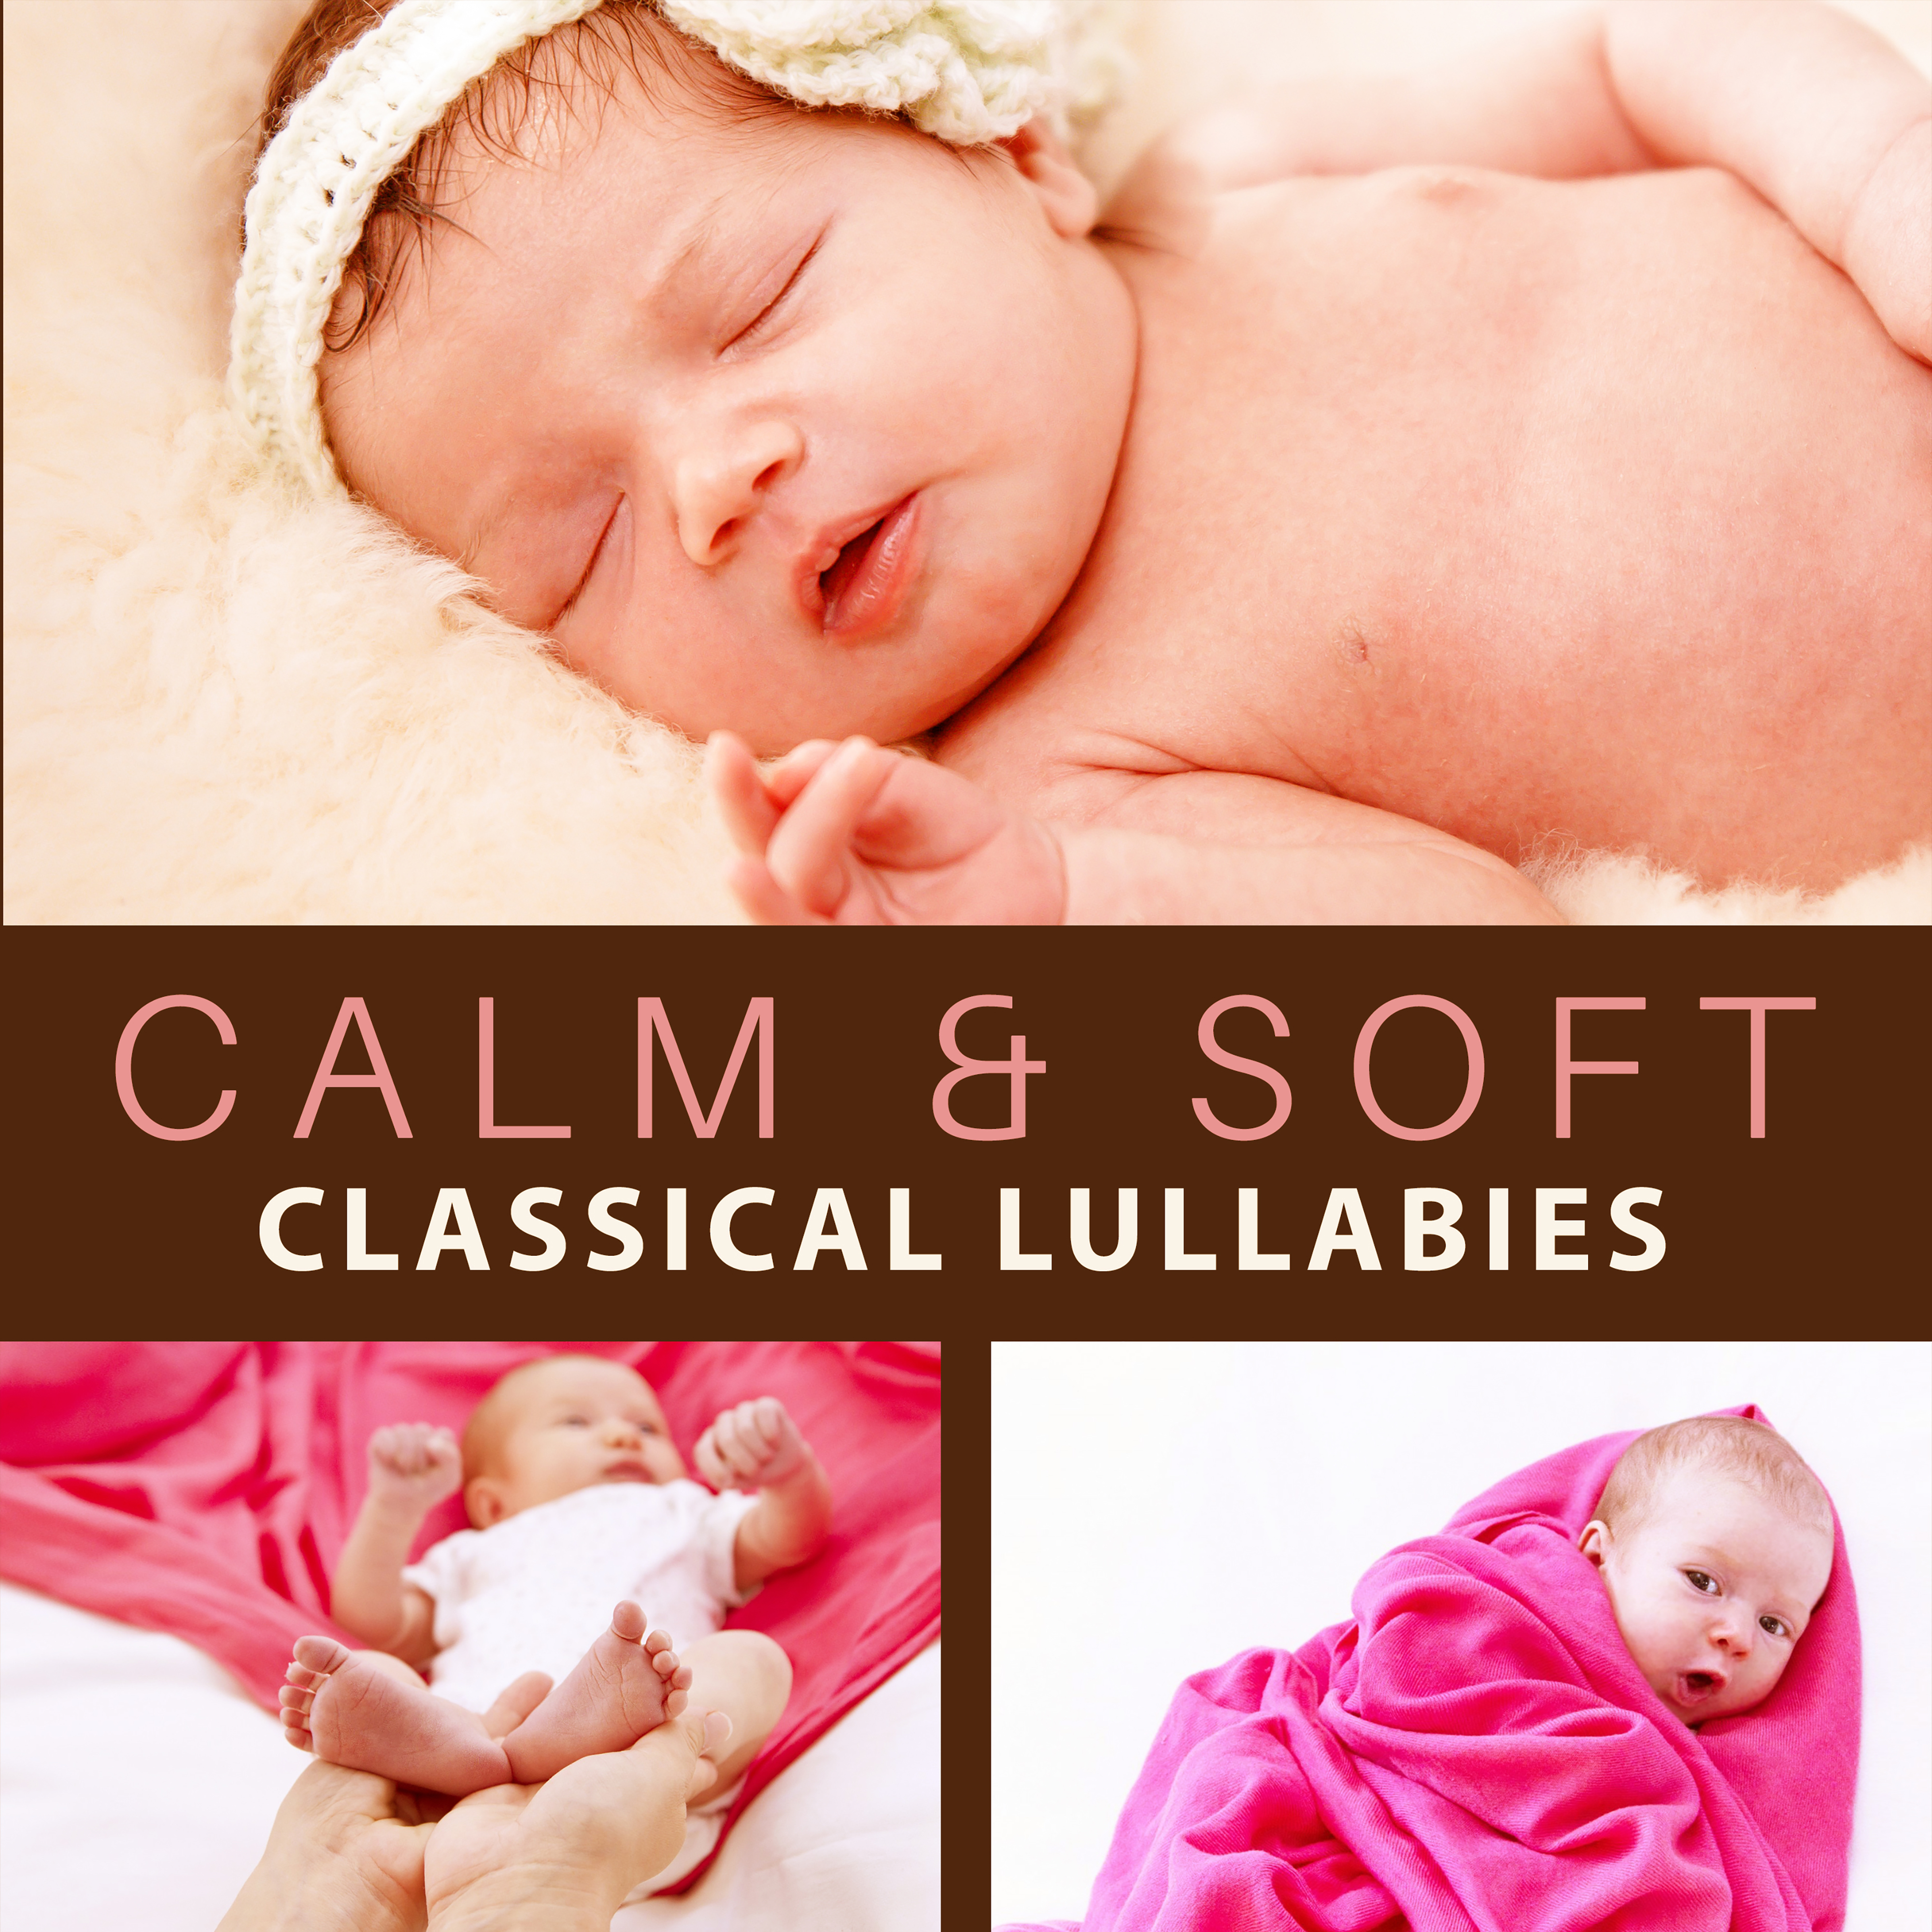 Calm & Soft Classical Lullabies – Soft Classical Music to Baby Sleep, Peaceful Classics Waves, No More Stress